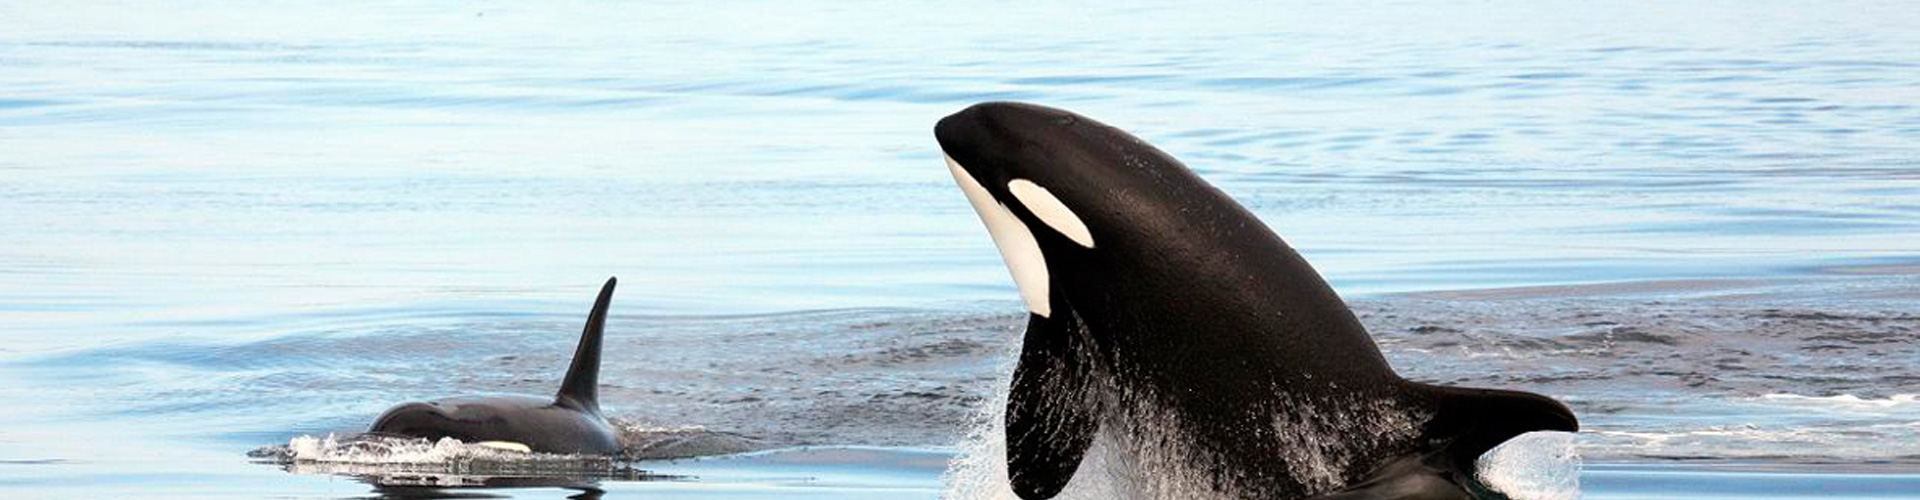 Protect endangered orca whales from pipelines and oil tankers